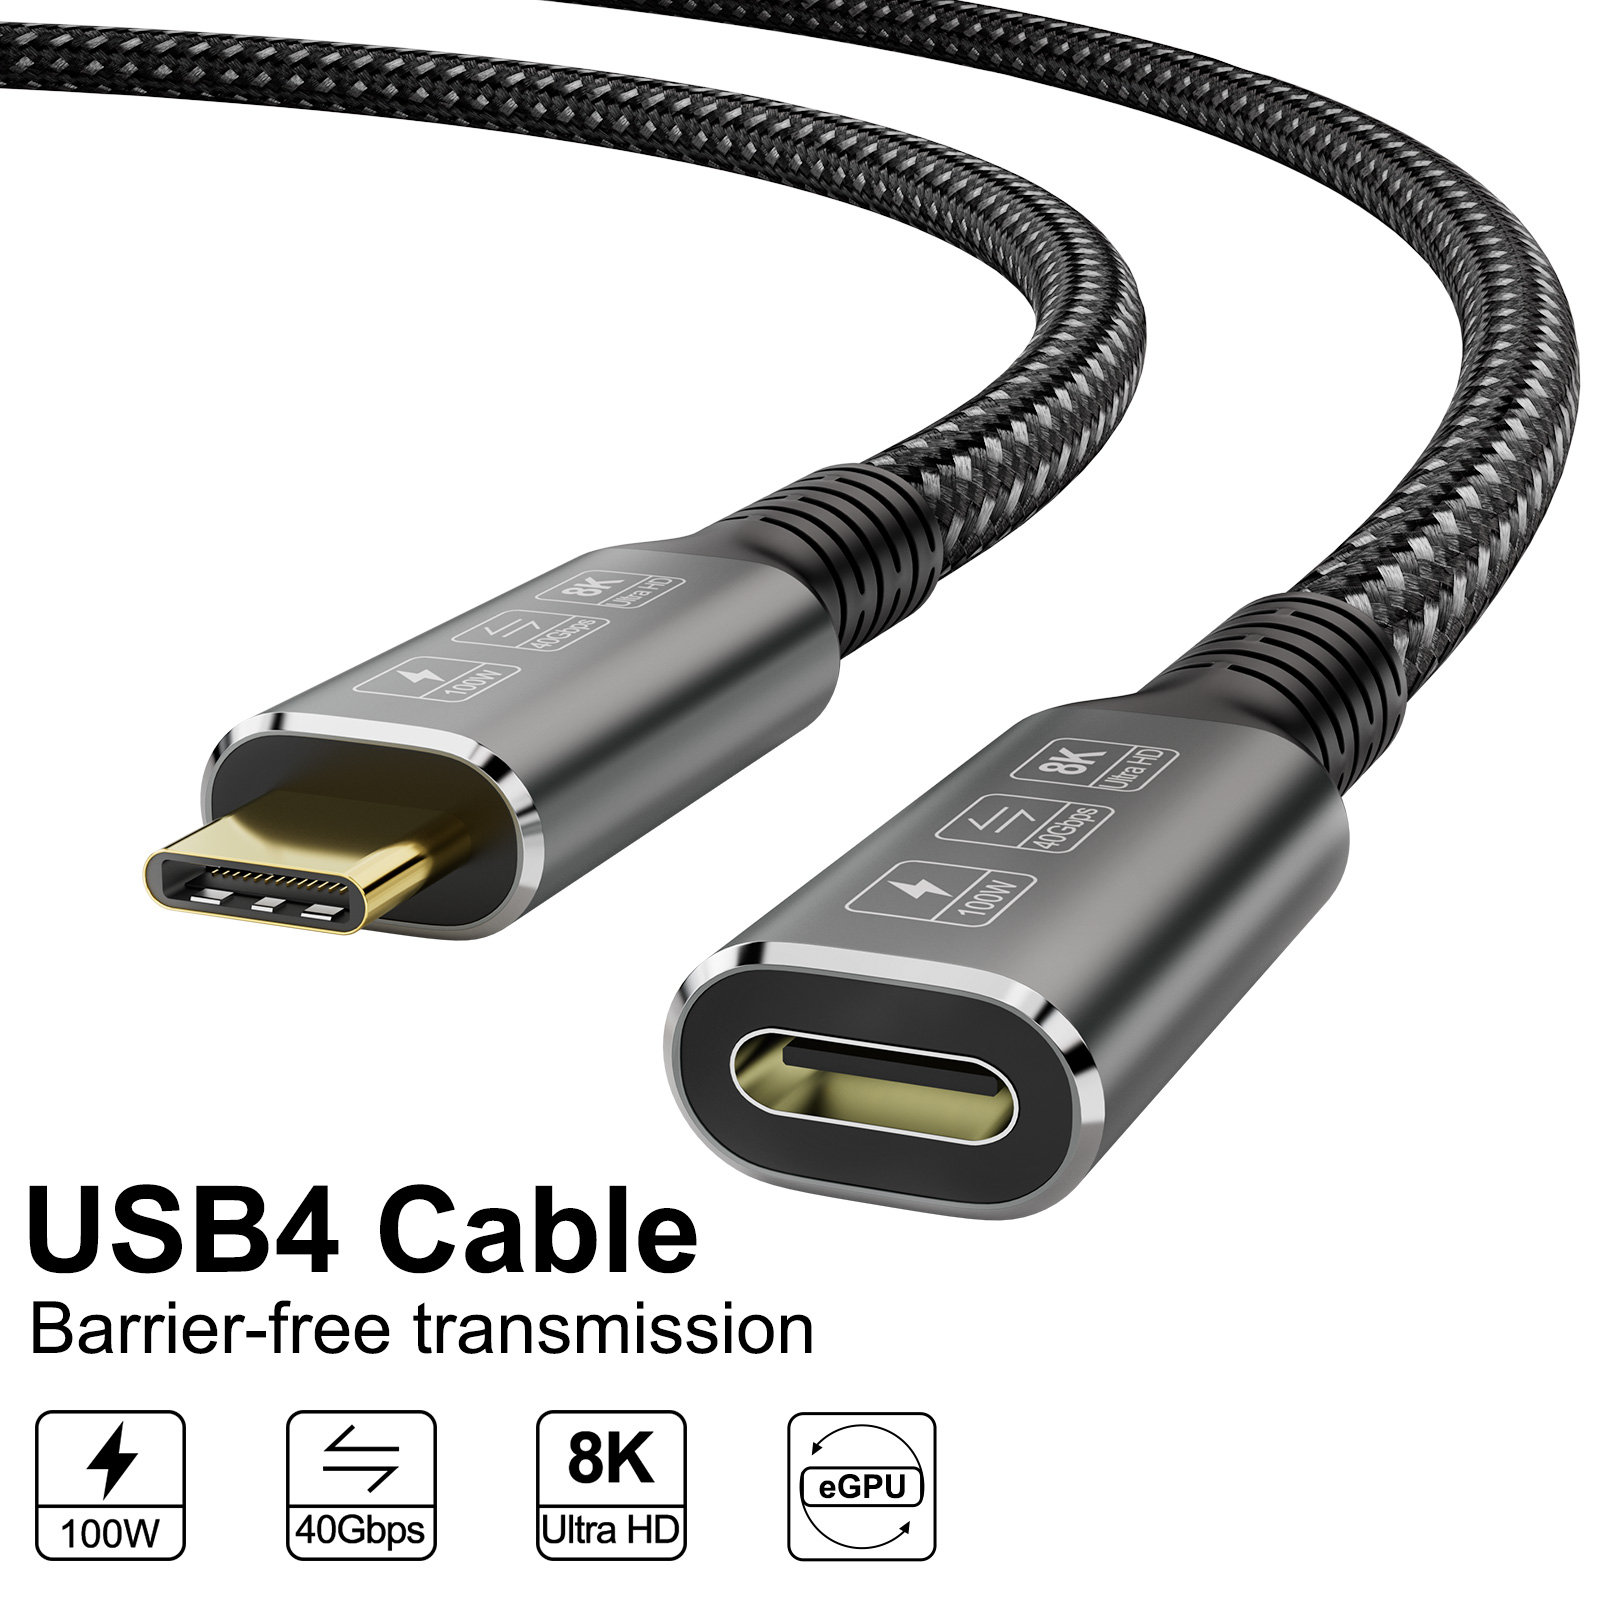 CableDeconn USB4 8K Cable 0.8M Thunderbolt 4 Compatible USB 4 Type-c Male  to Female Extension Cable Ultra HD 8K@60Hz 100W Charging 40Gbps Data  Transfer Compatible with External SSD eGPU F0408-USB C Cable-CableDeconn